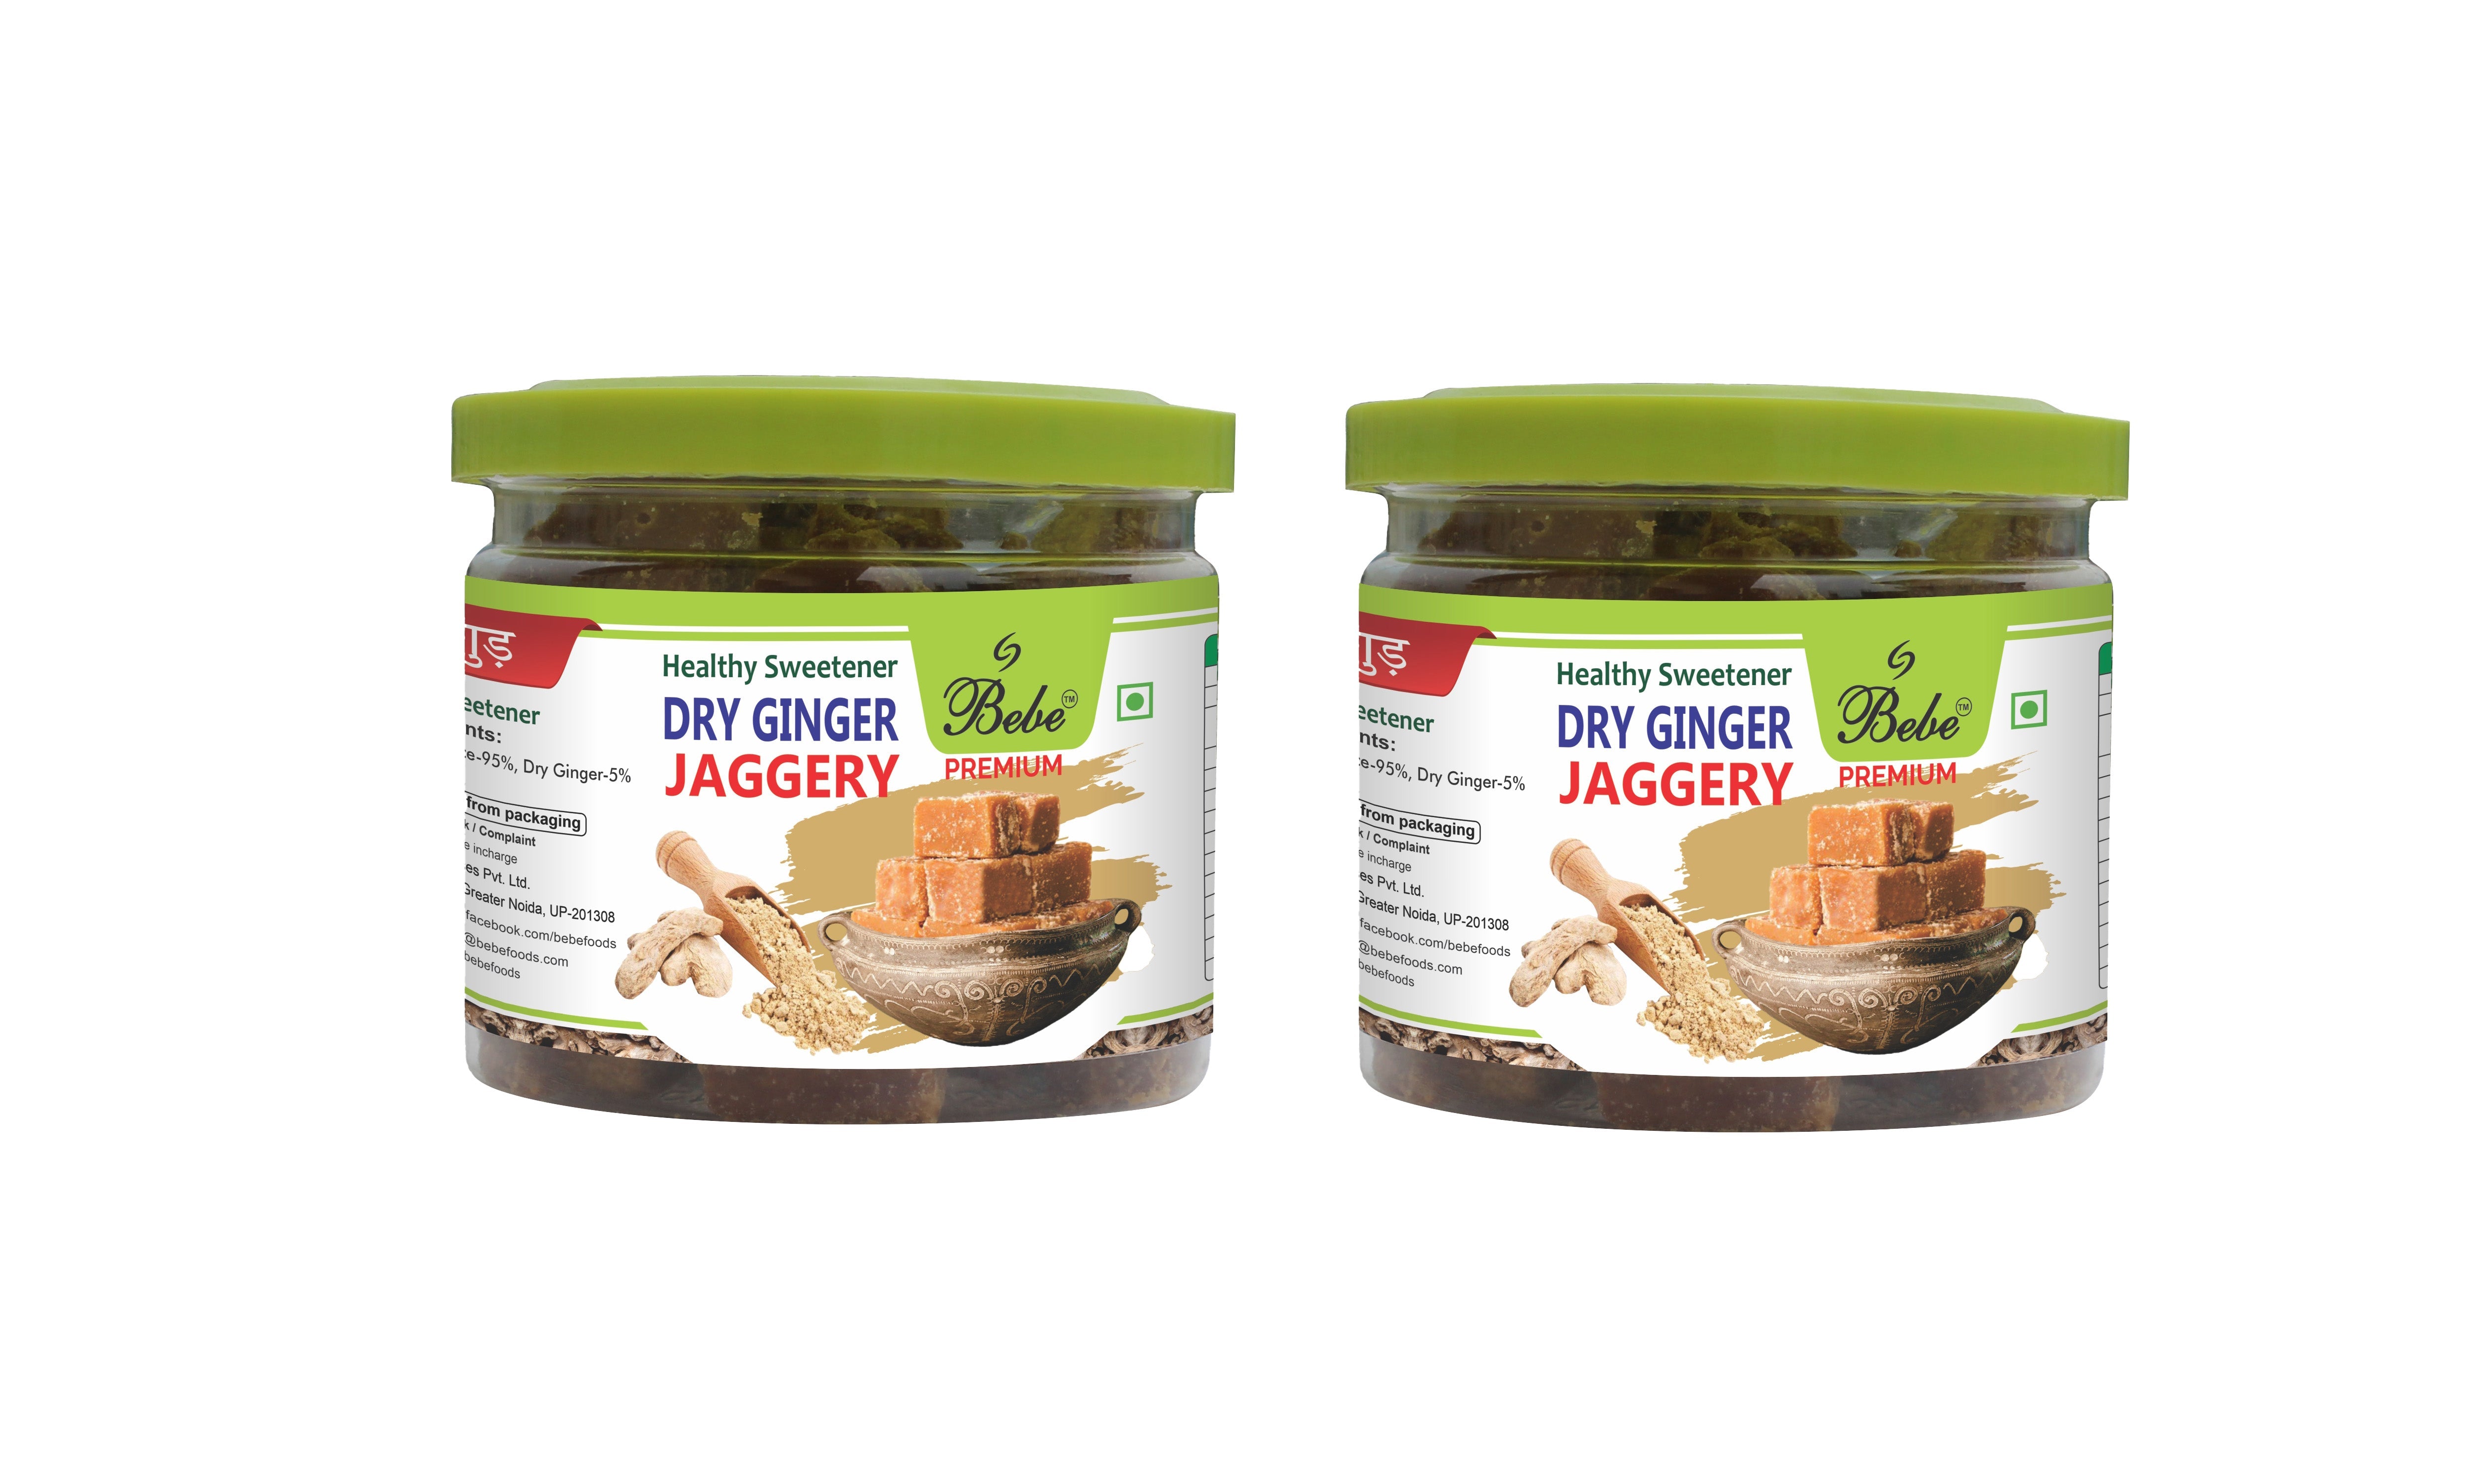 Bebe Dryginger Jaggery  200g x 2 PackFront  | Sauth Gur |Gud | Mouth Freshner | A must after meals | All Natural | Healthy Sugar | Traditionally made in small batches | No chemicals | Sweetener for Tea,Coffee,Milk | Gud ki Roti,Parantha